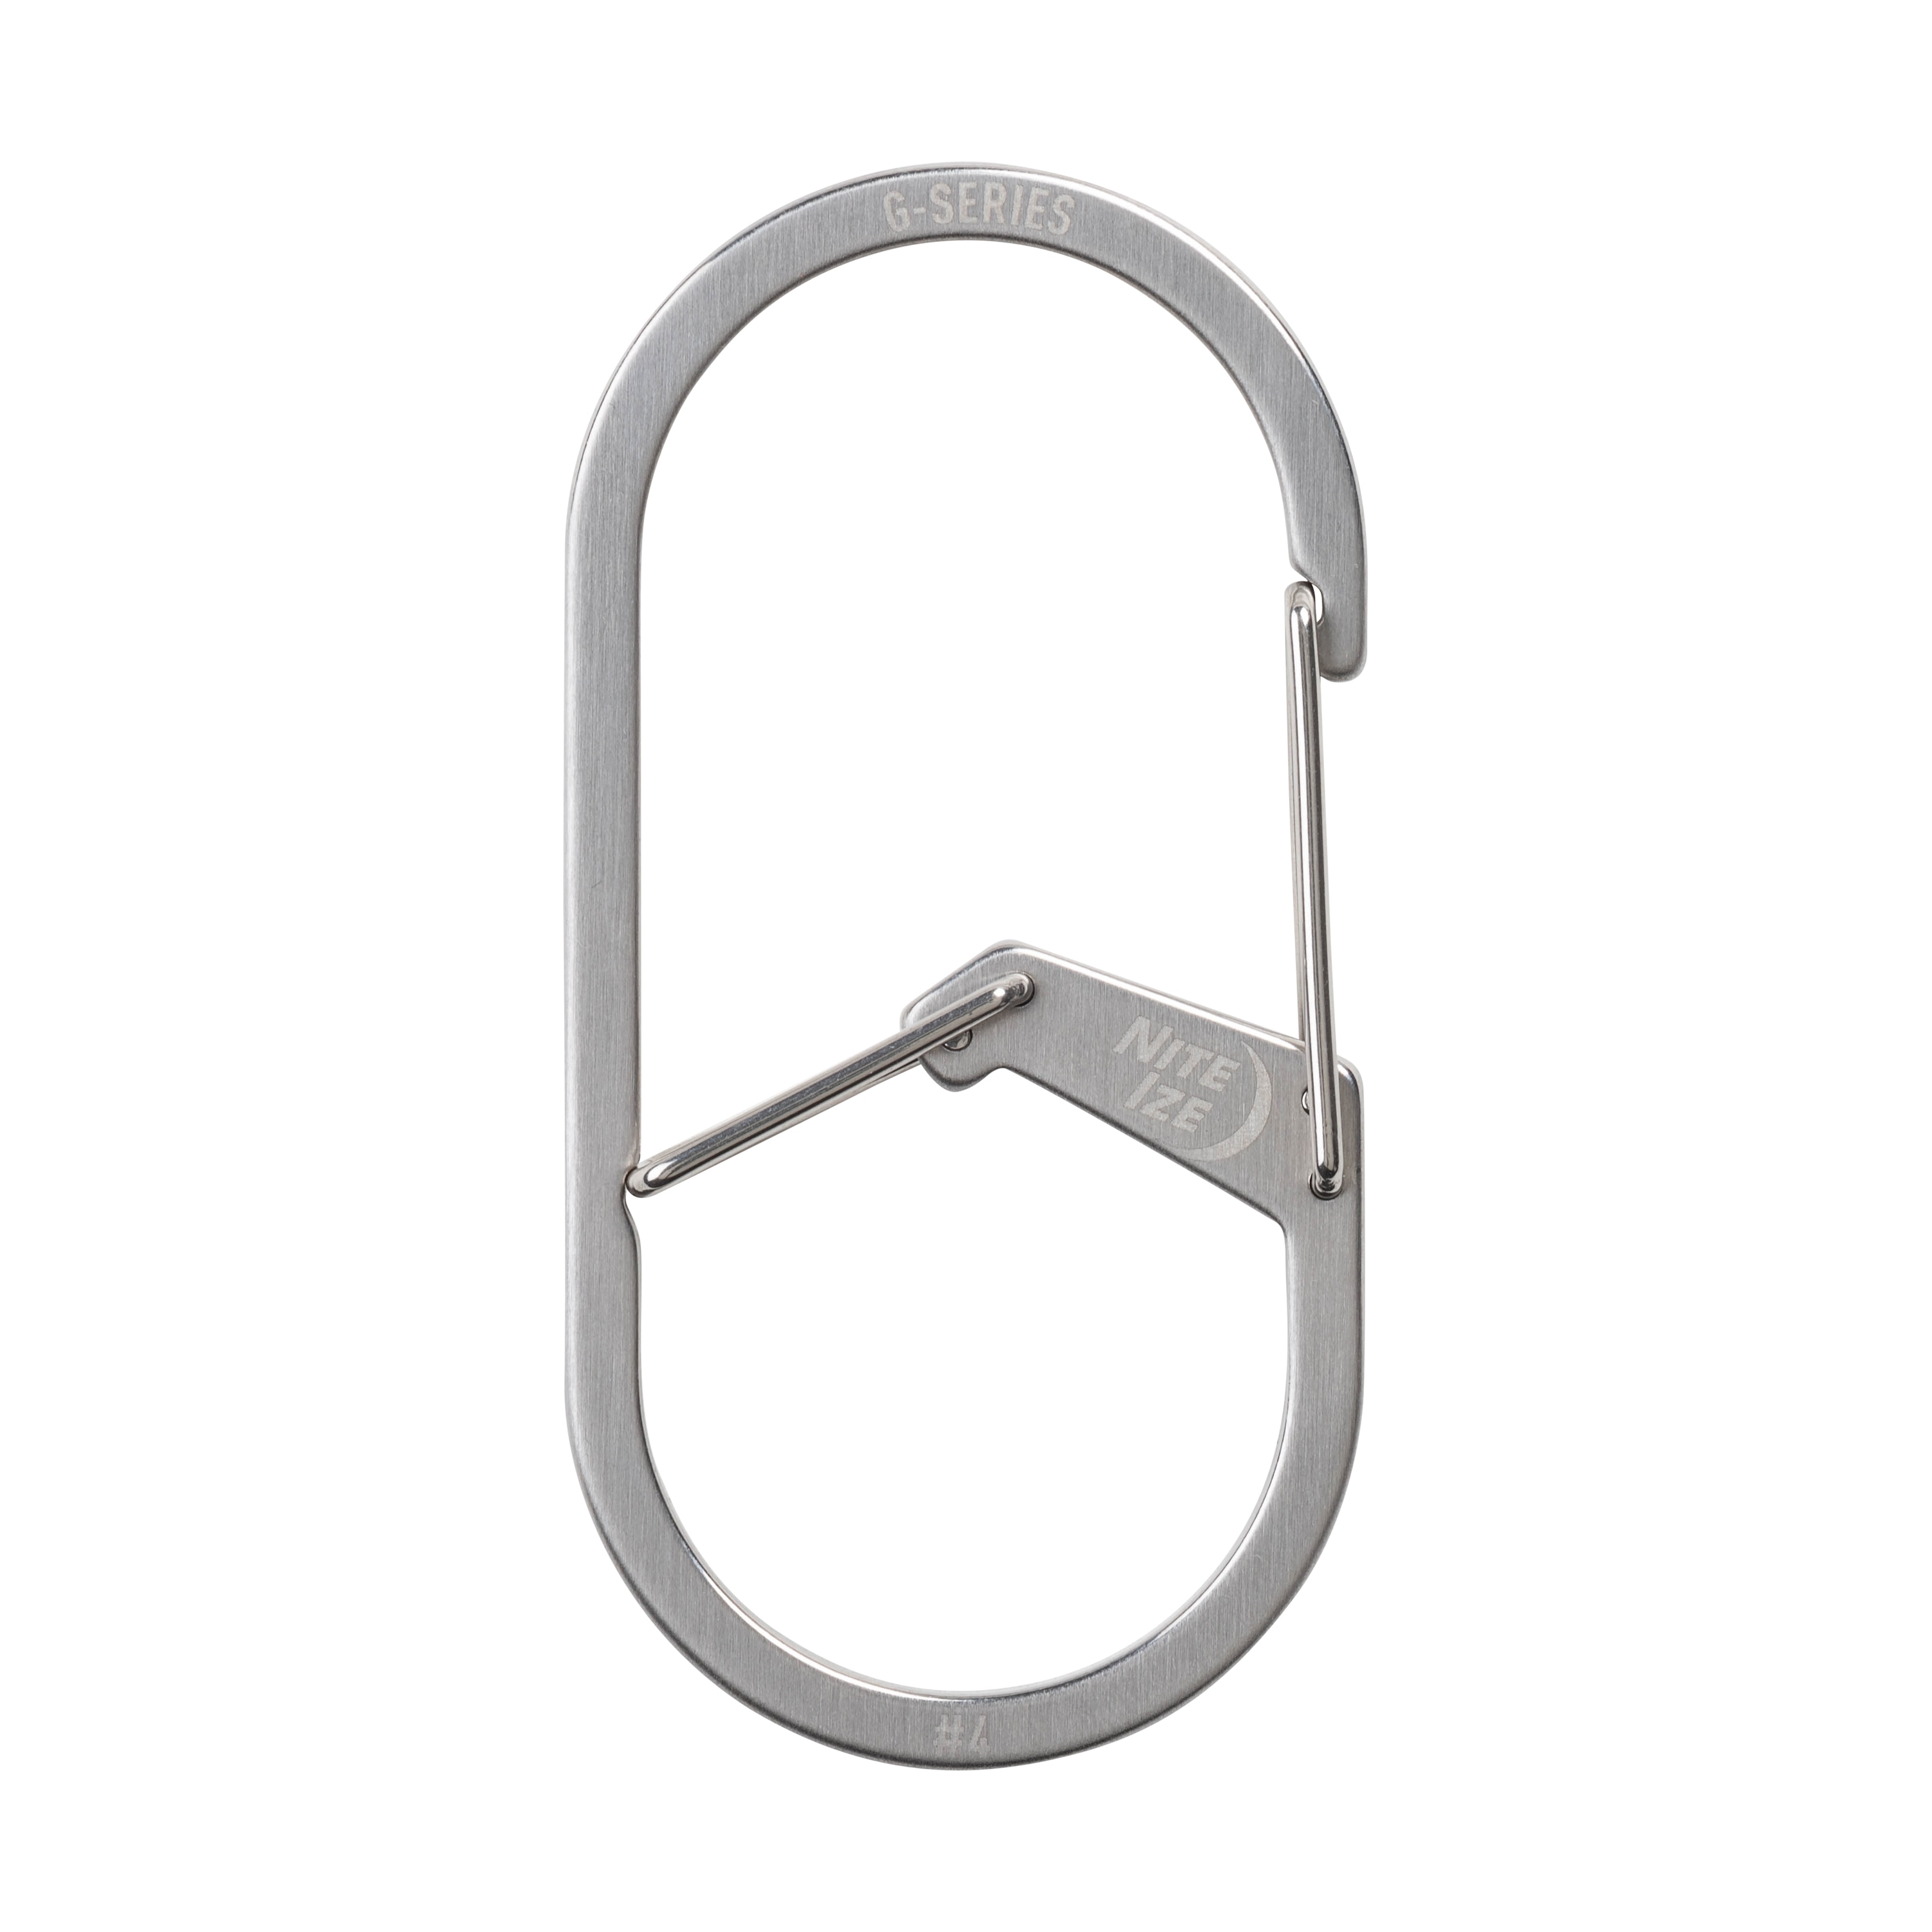 Minute Key Silver Snap-hook Key Ring in the Key Accessories